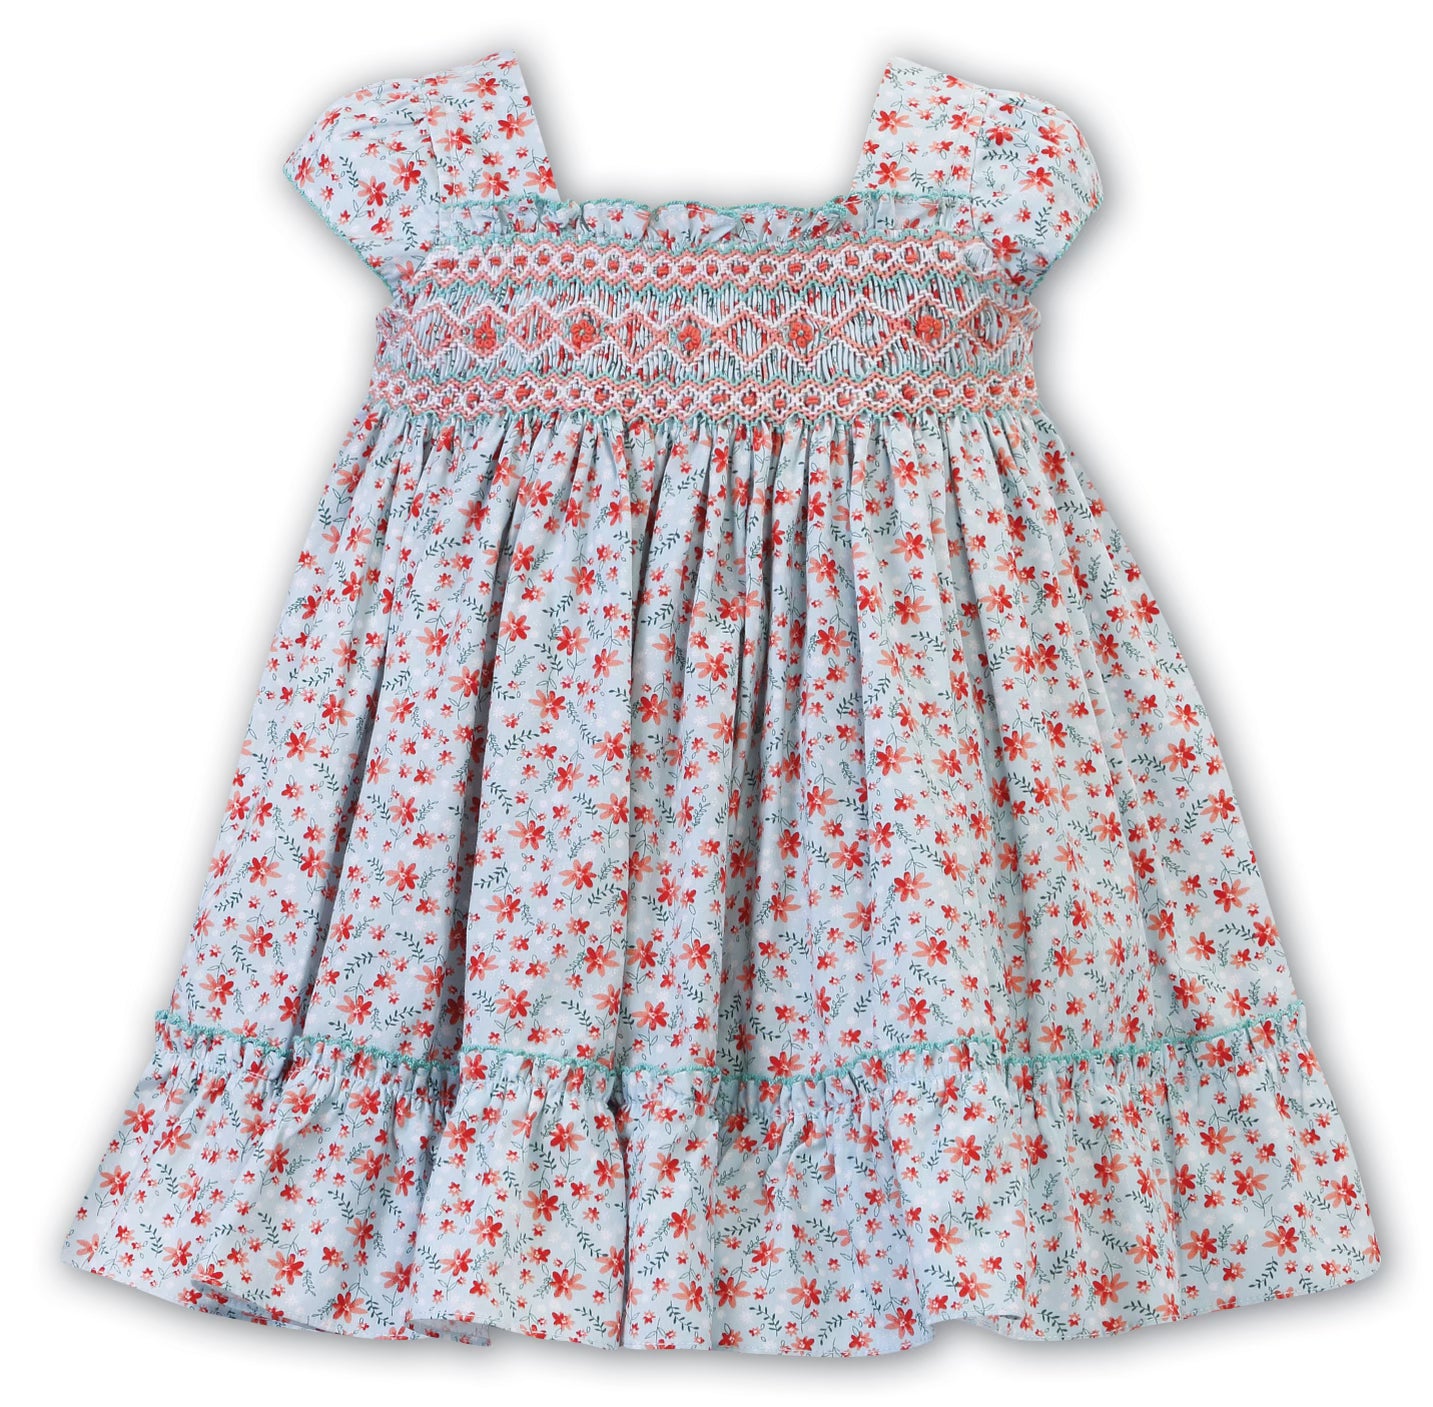 SS23 Sarah Louise Mint Ditsy Print Hand Smocked & Embroidered Dress